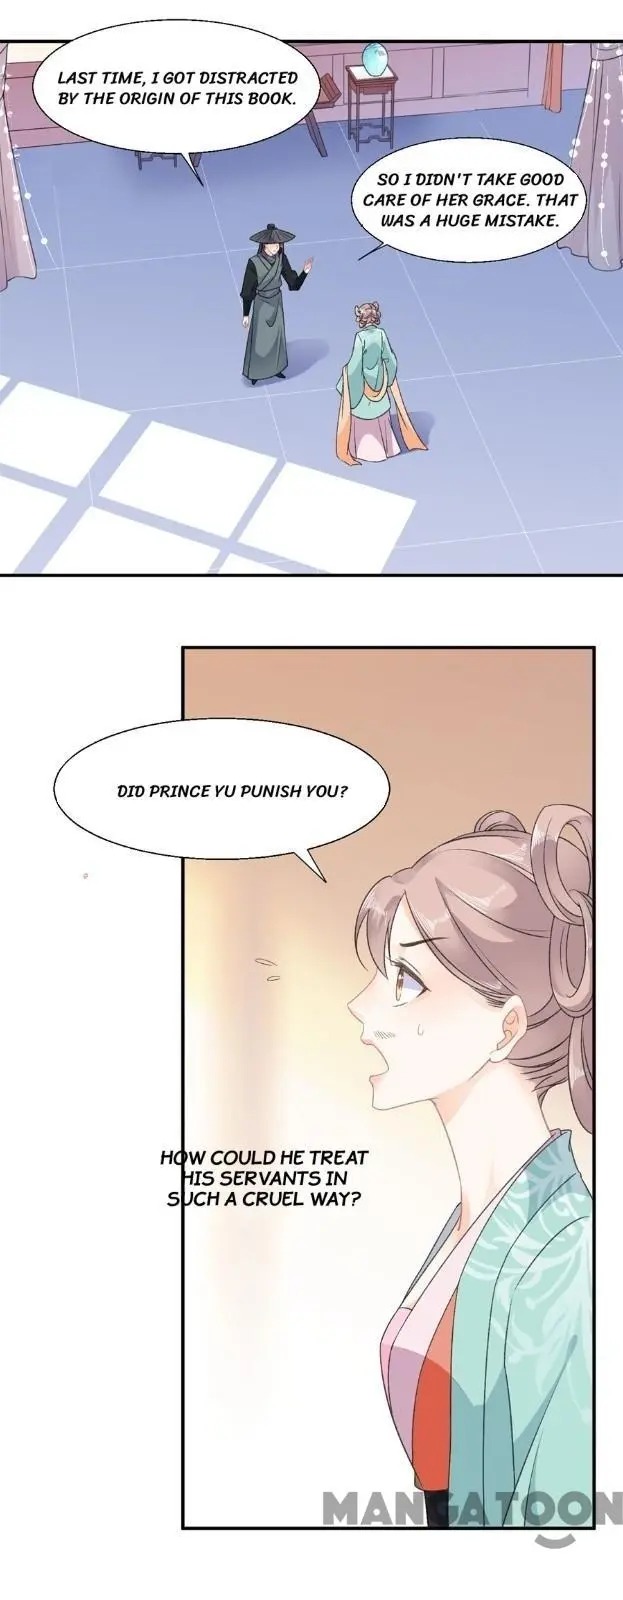 Falling All In You - Page 2